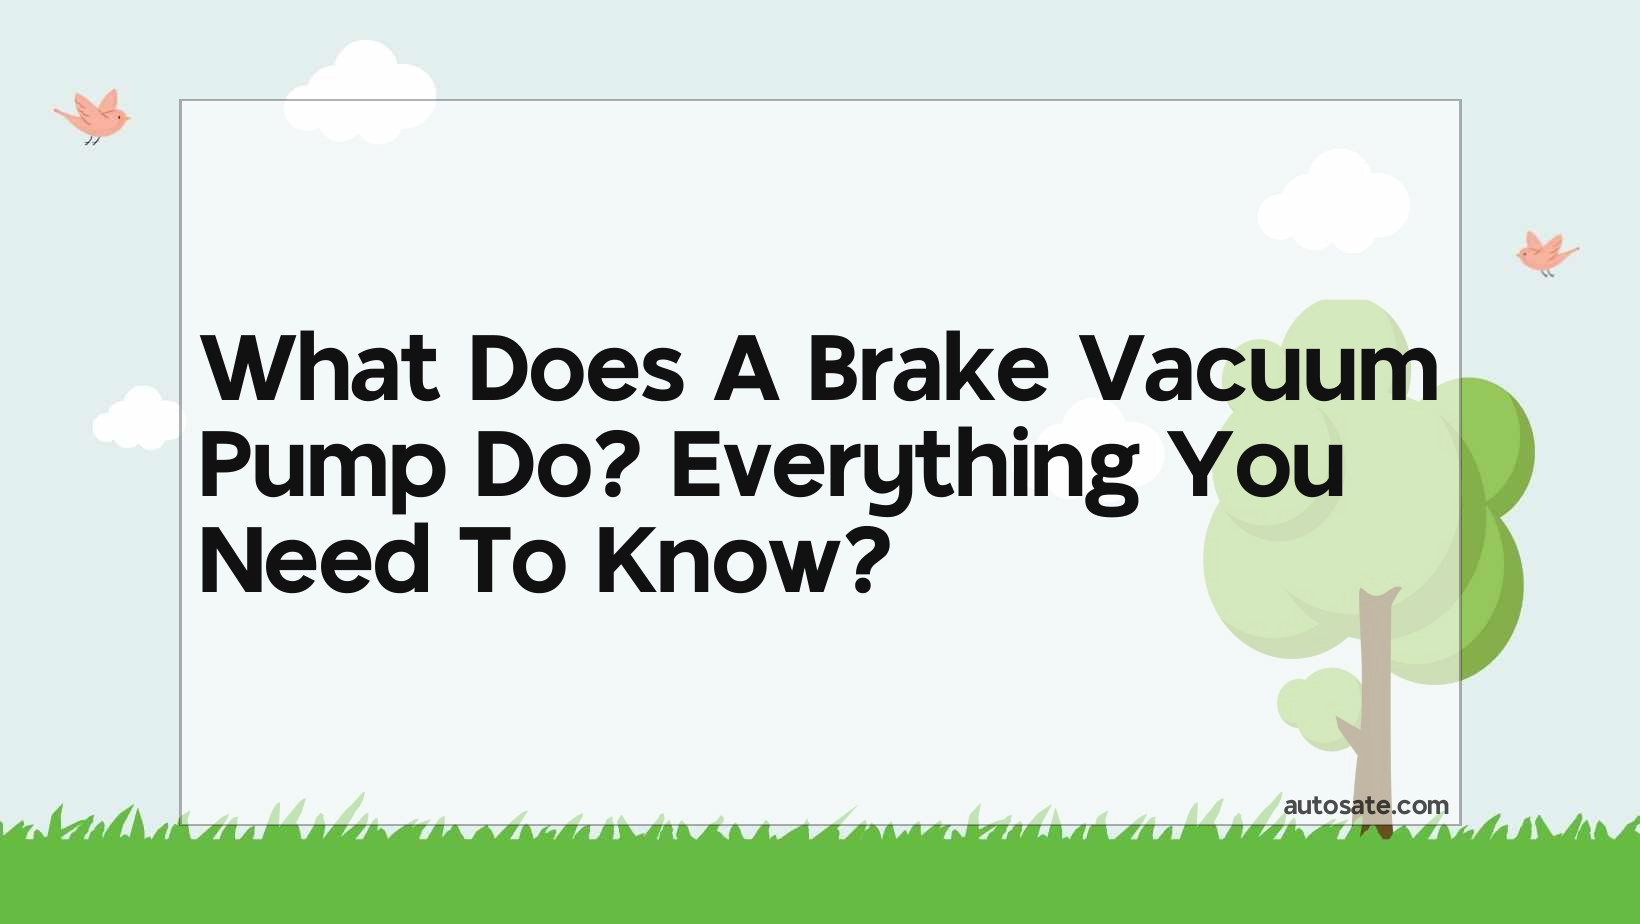 What Does A Brake Vacuum Pump Do? Everything You Need To Know